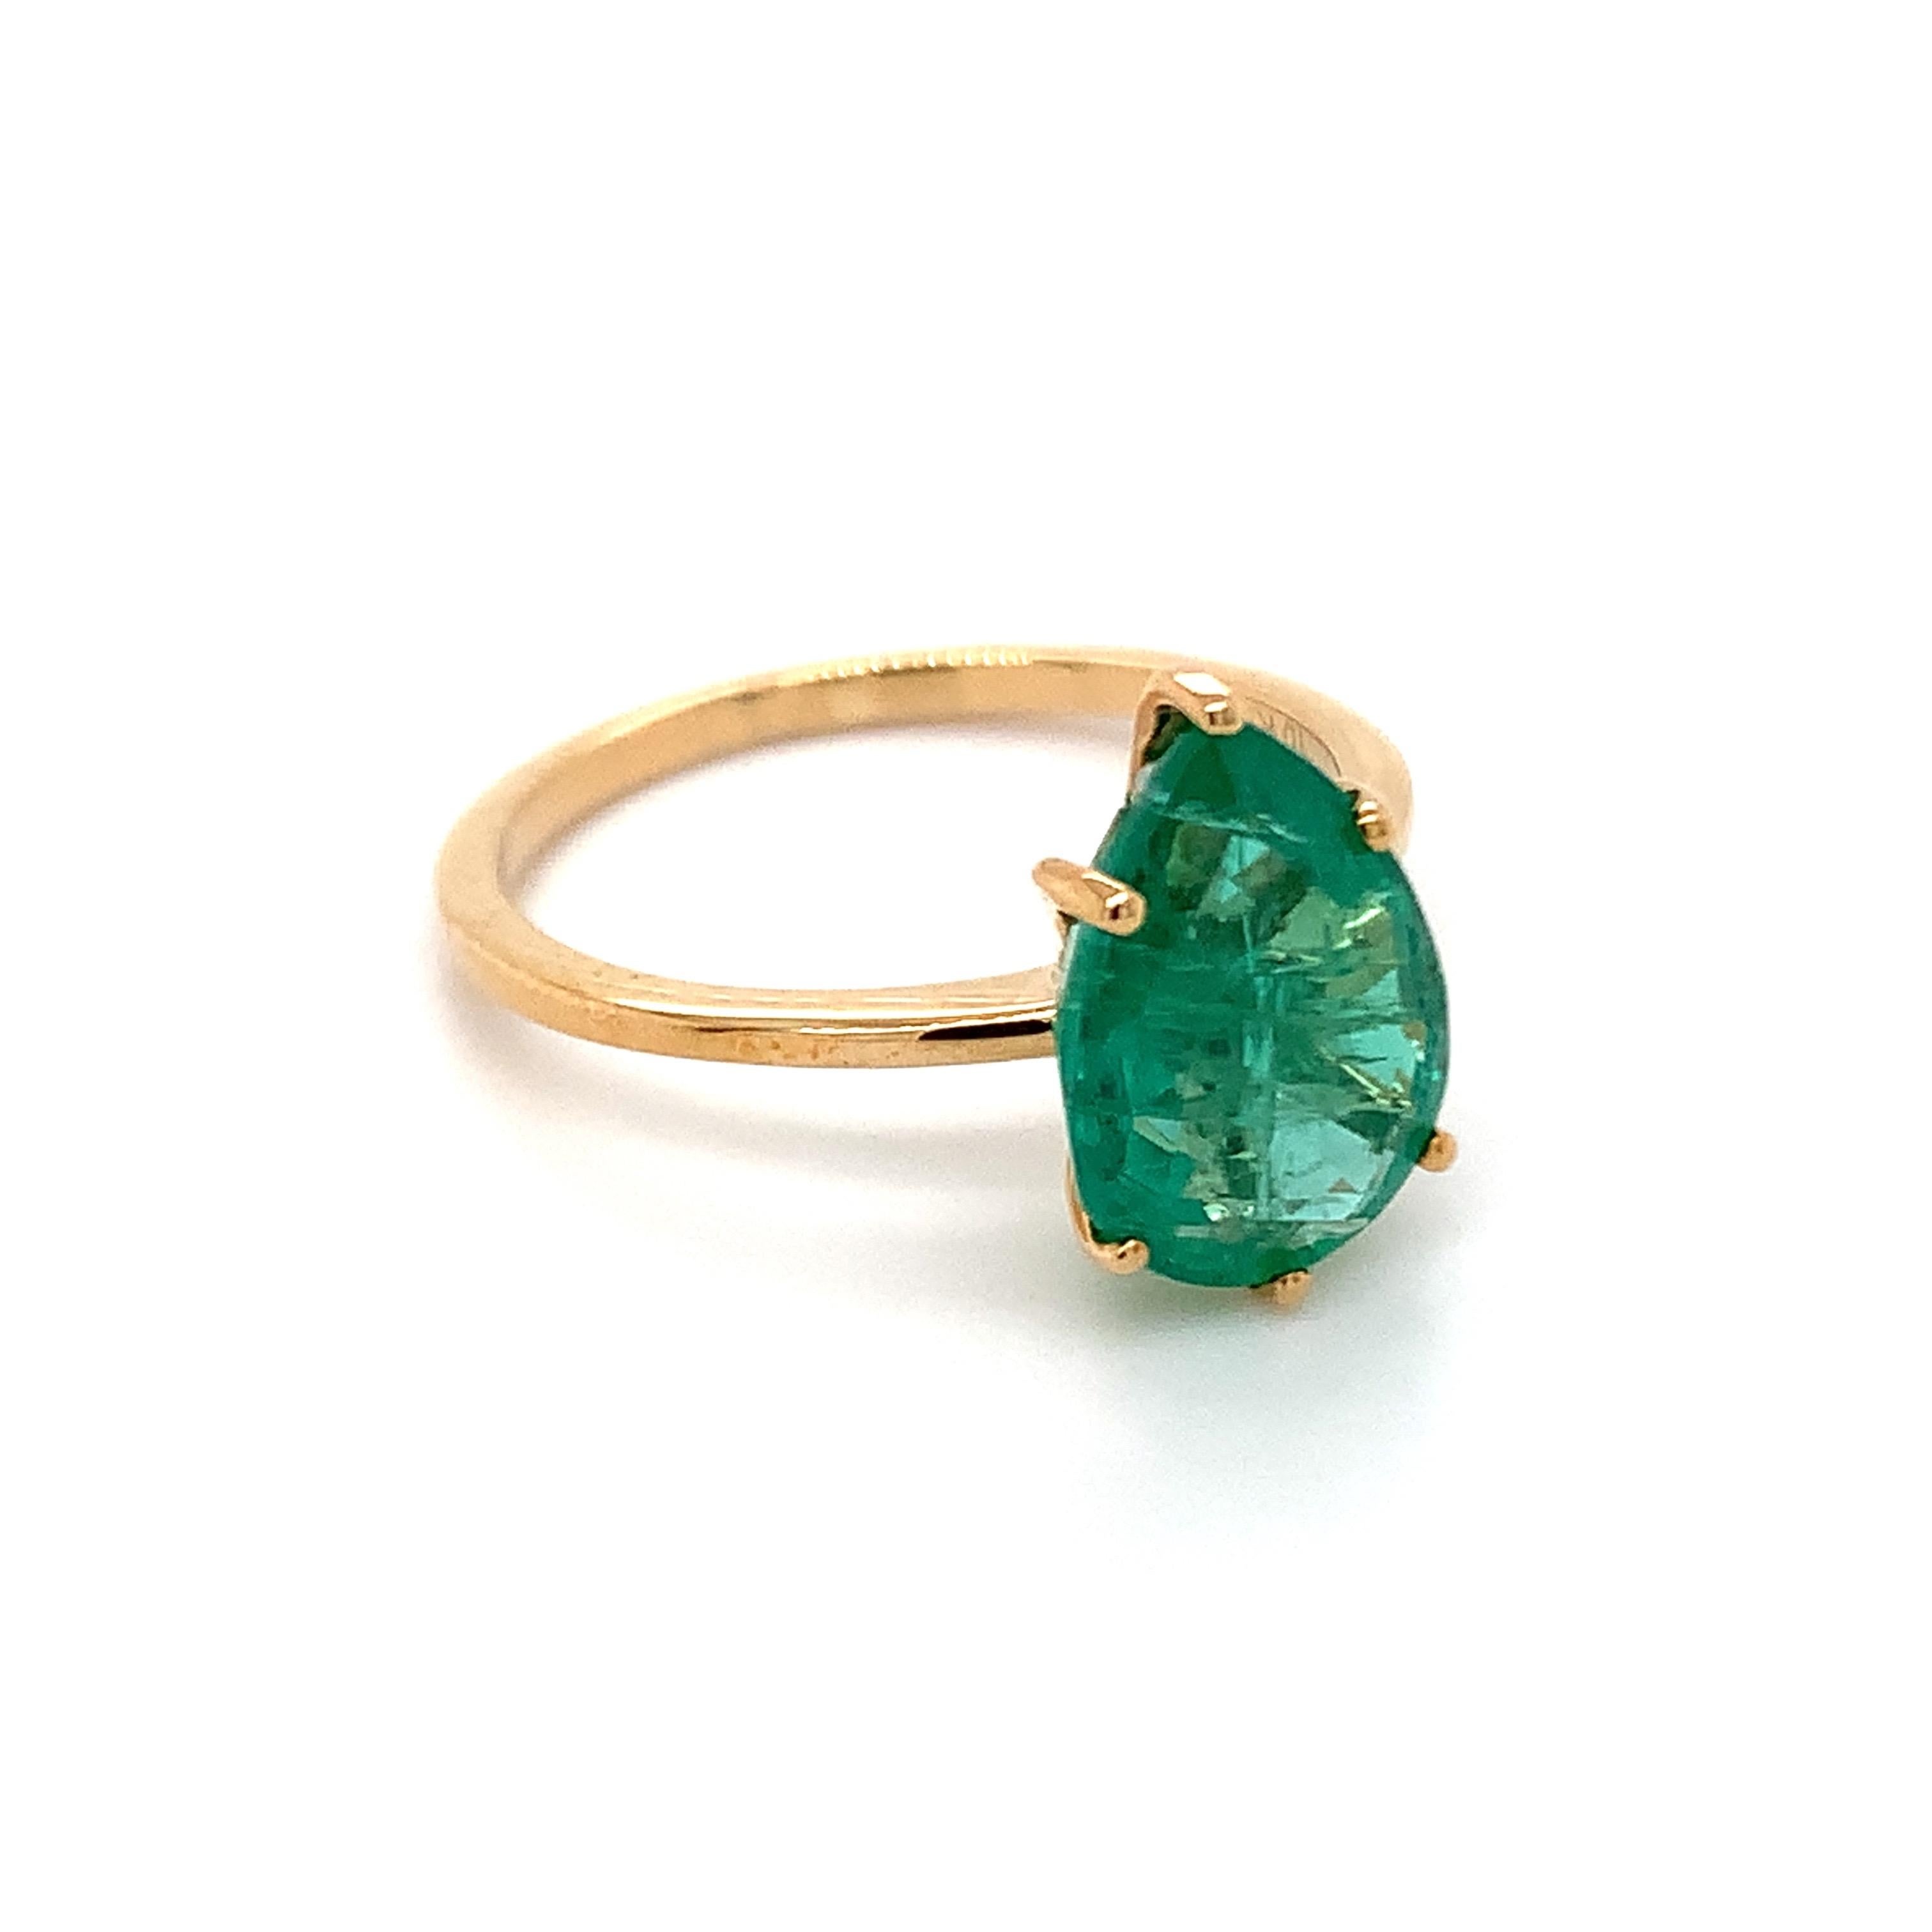 Pear shape emerald gemstone beautifully crafted in a 10K yellow gold ring.

With a vibrant green color hue. The birthstone for May is a symbol of renewed spring growth. Explore a vast range of precious stone Jewelry in our store. 

Centre stone is a